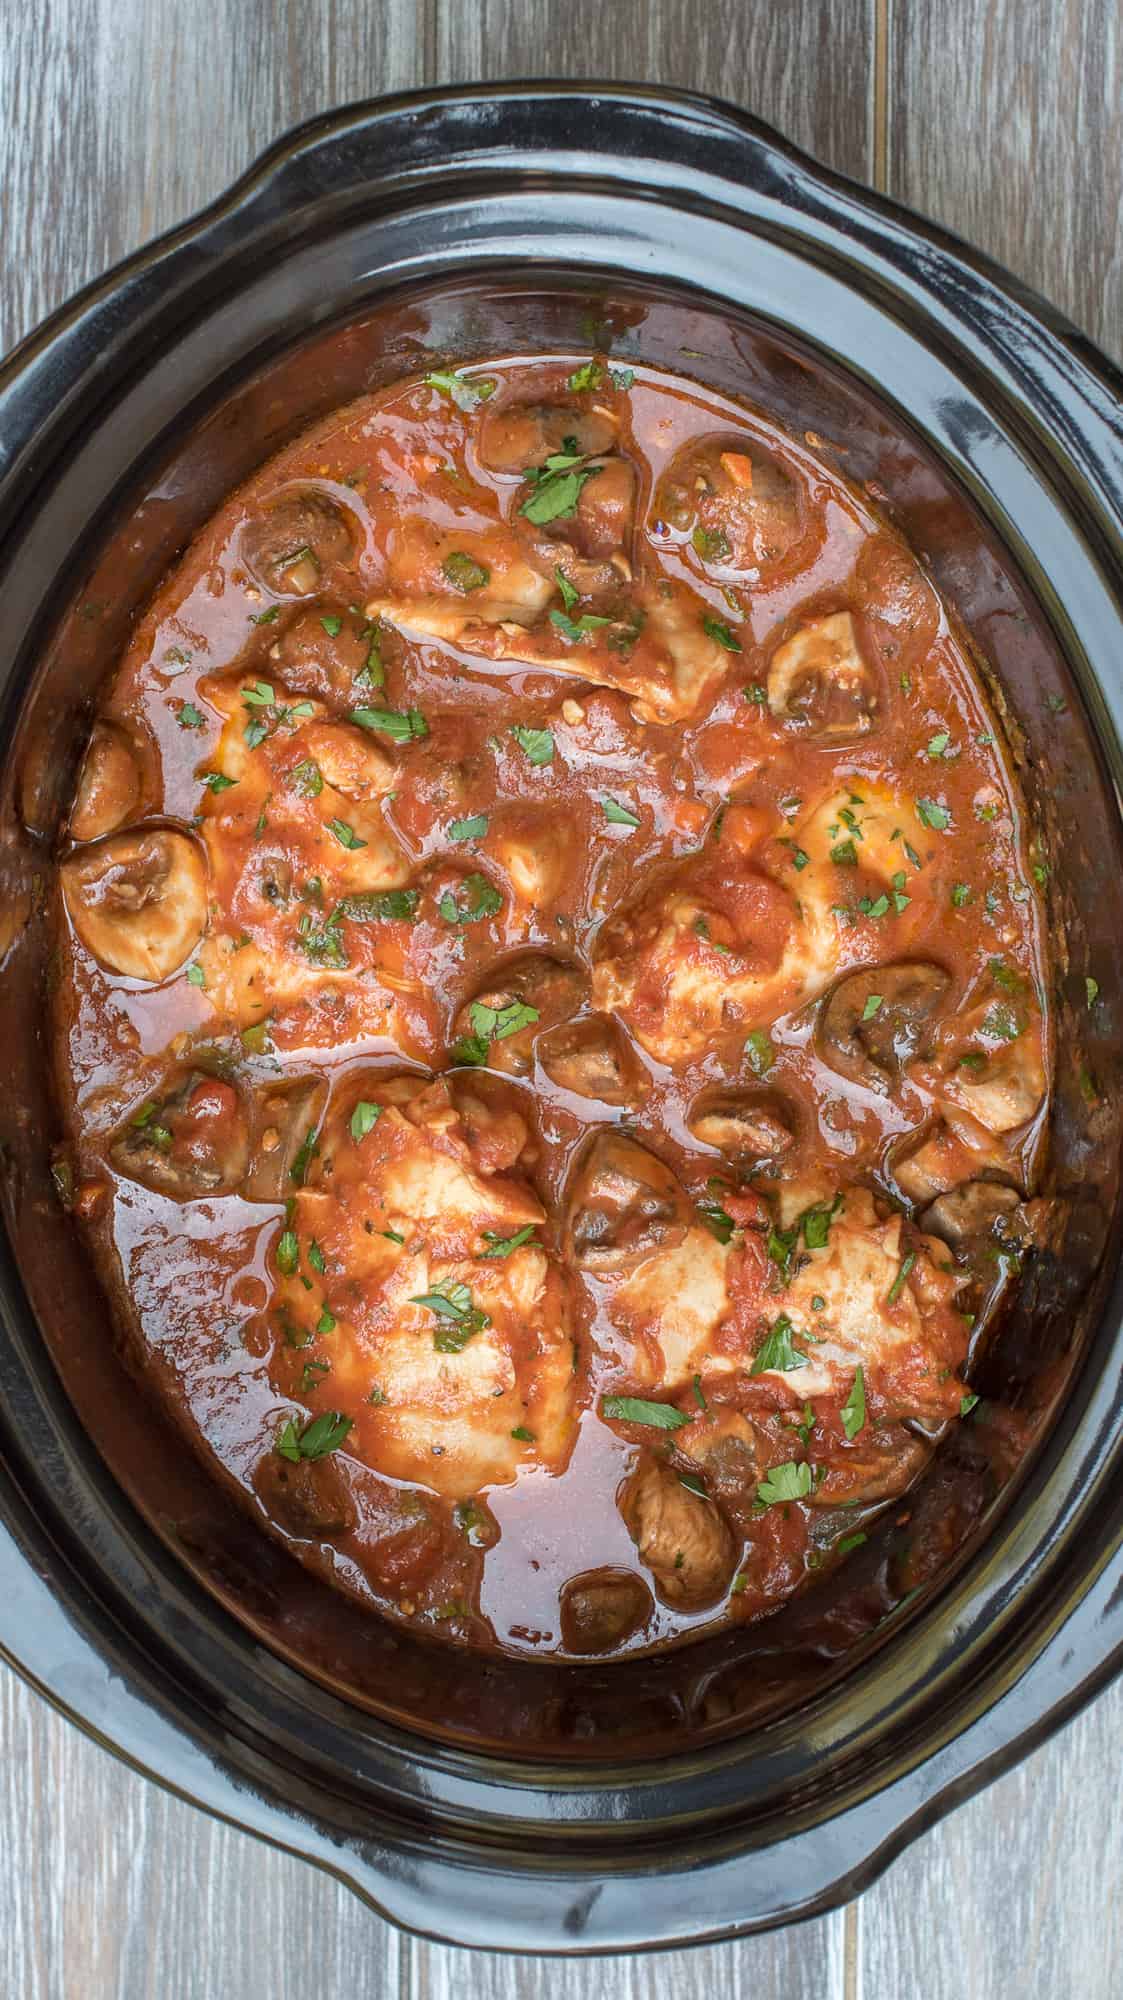 Slow Cooker Chicken Cacciatore Valerie S Kitchen,How Long Does It Take To Steam Brussel Sprouts